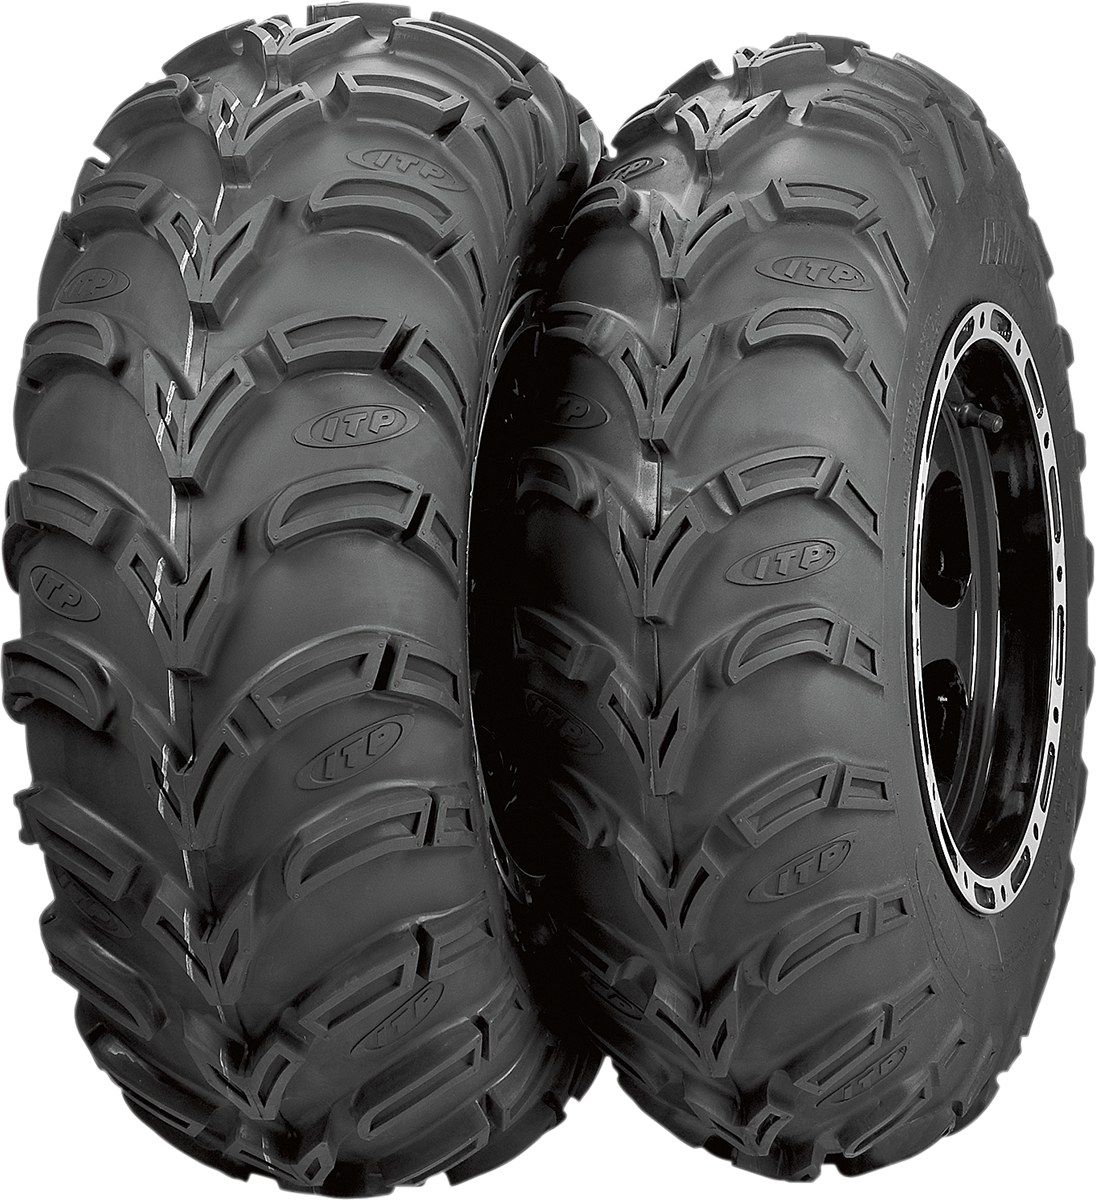 ITP Tire - Mud Lite AT - Front/Rear - 23x10-10 - 6 Ply 56A327